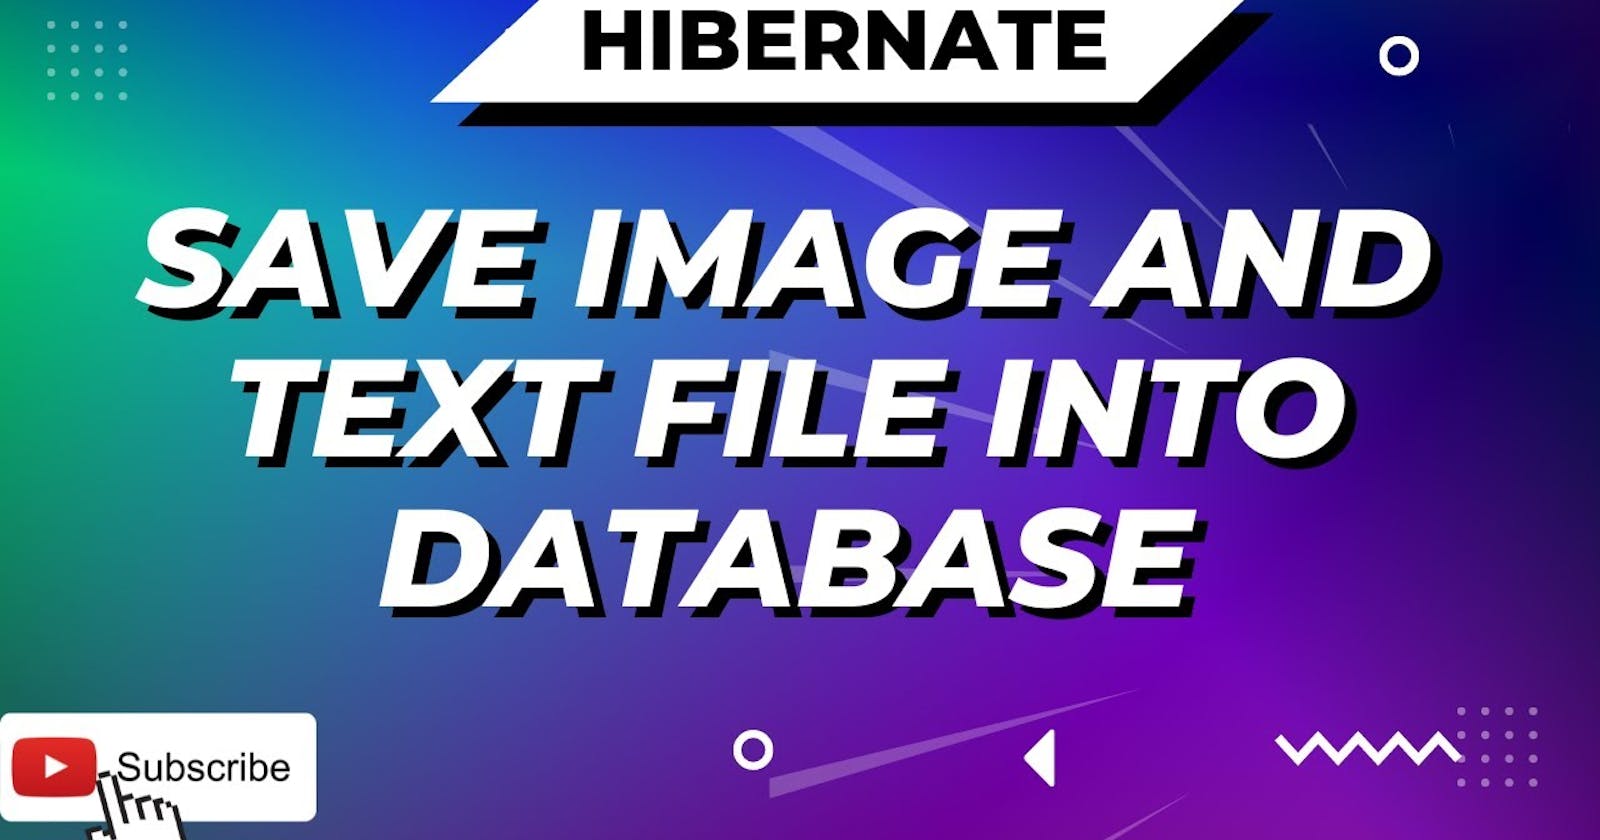 how to save images and files into database using hibernate